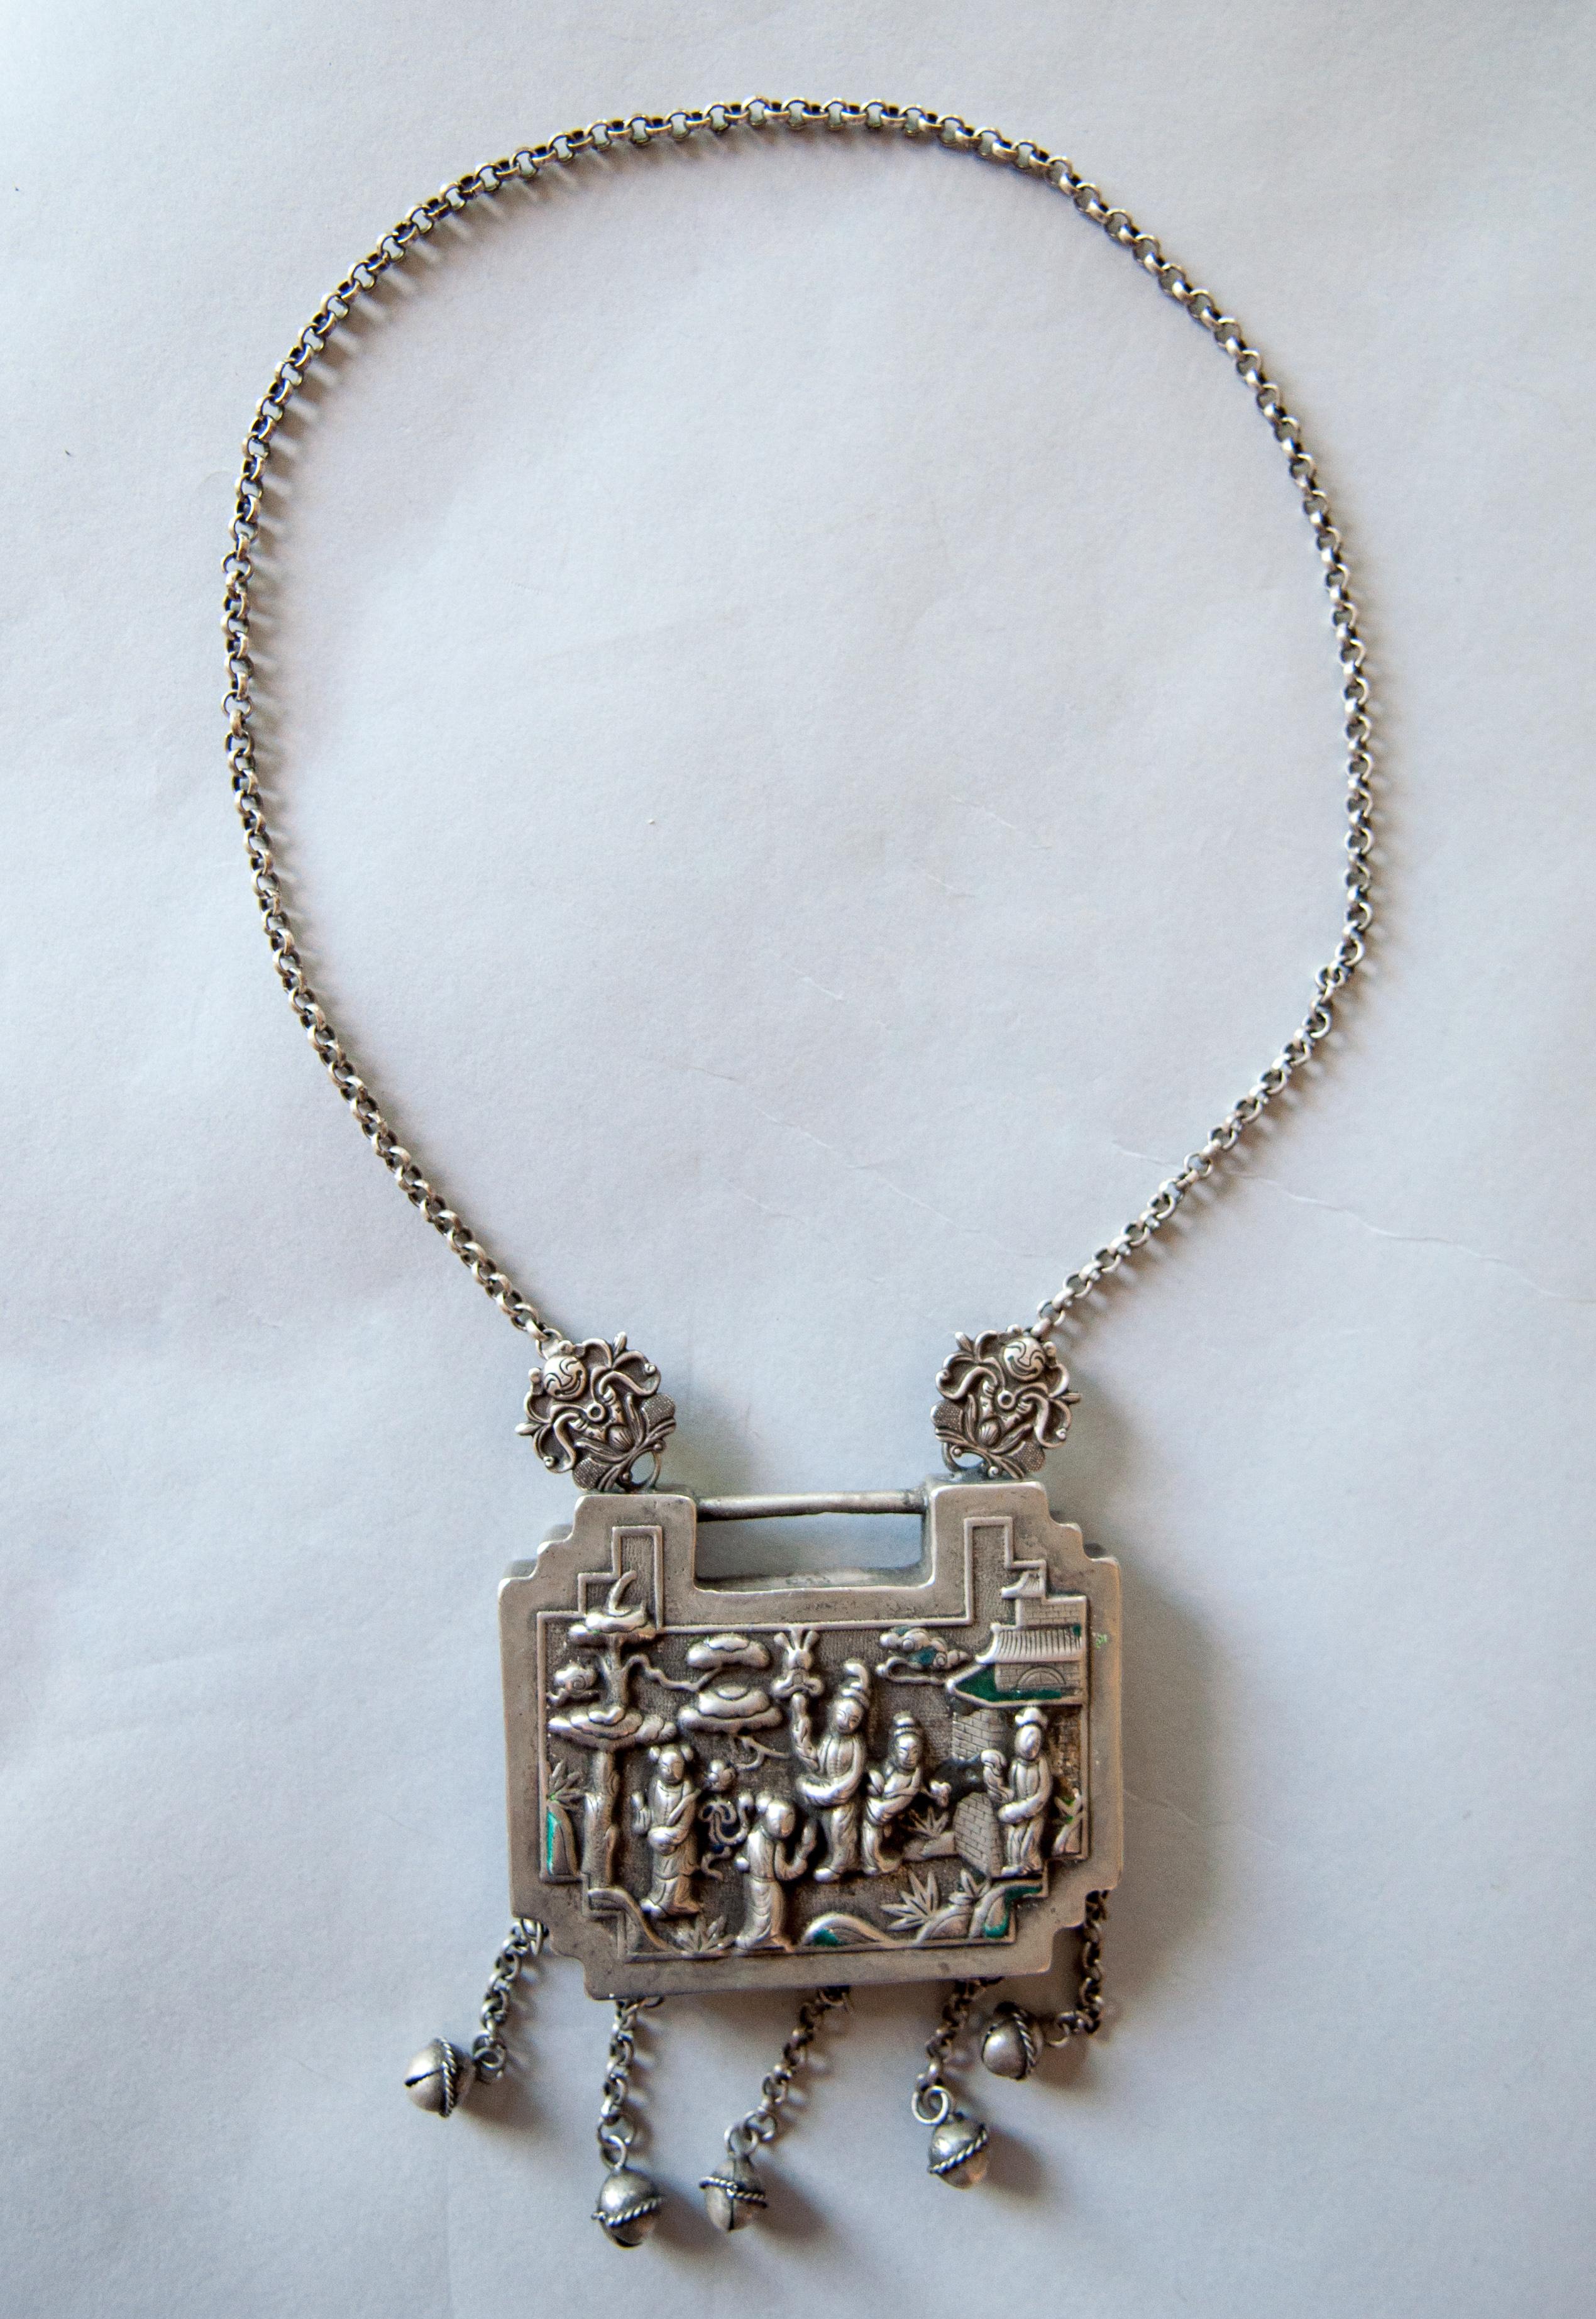 Child Amulet Lock, Silver Alloy, Yao or Hmong of SW China, Early 20th Century 5